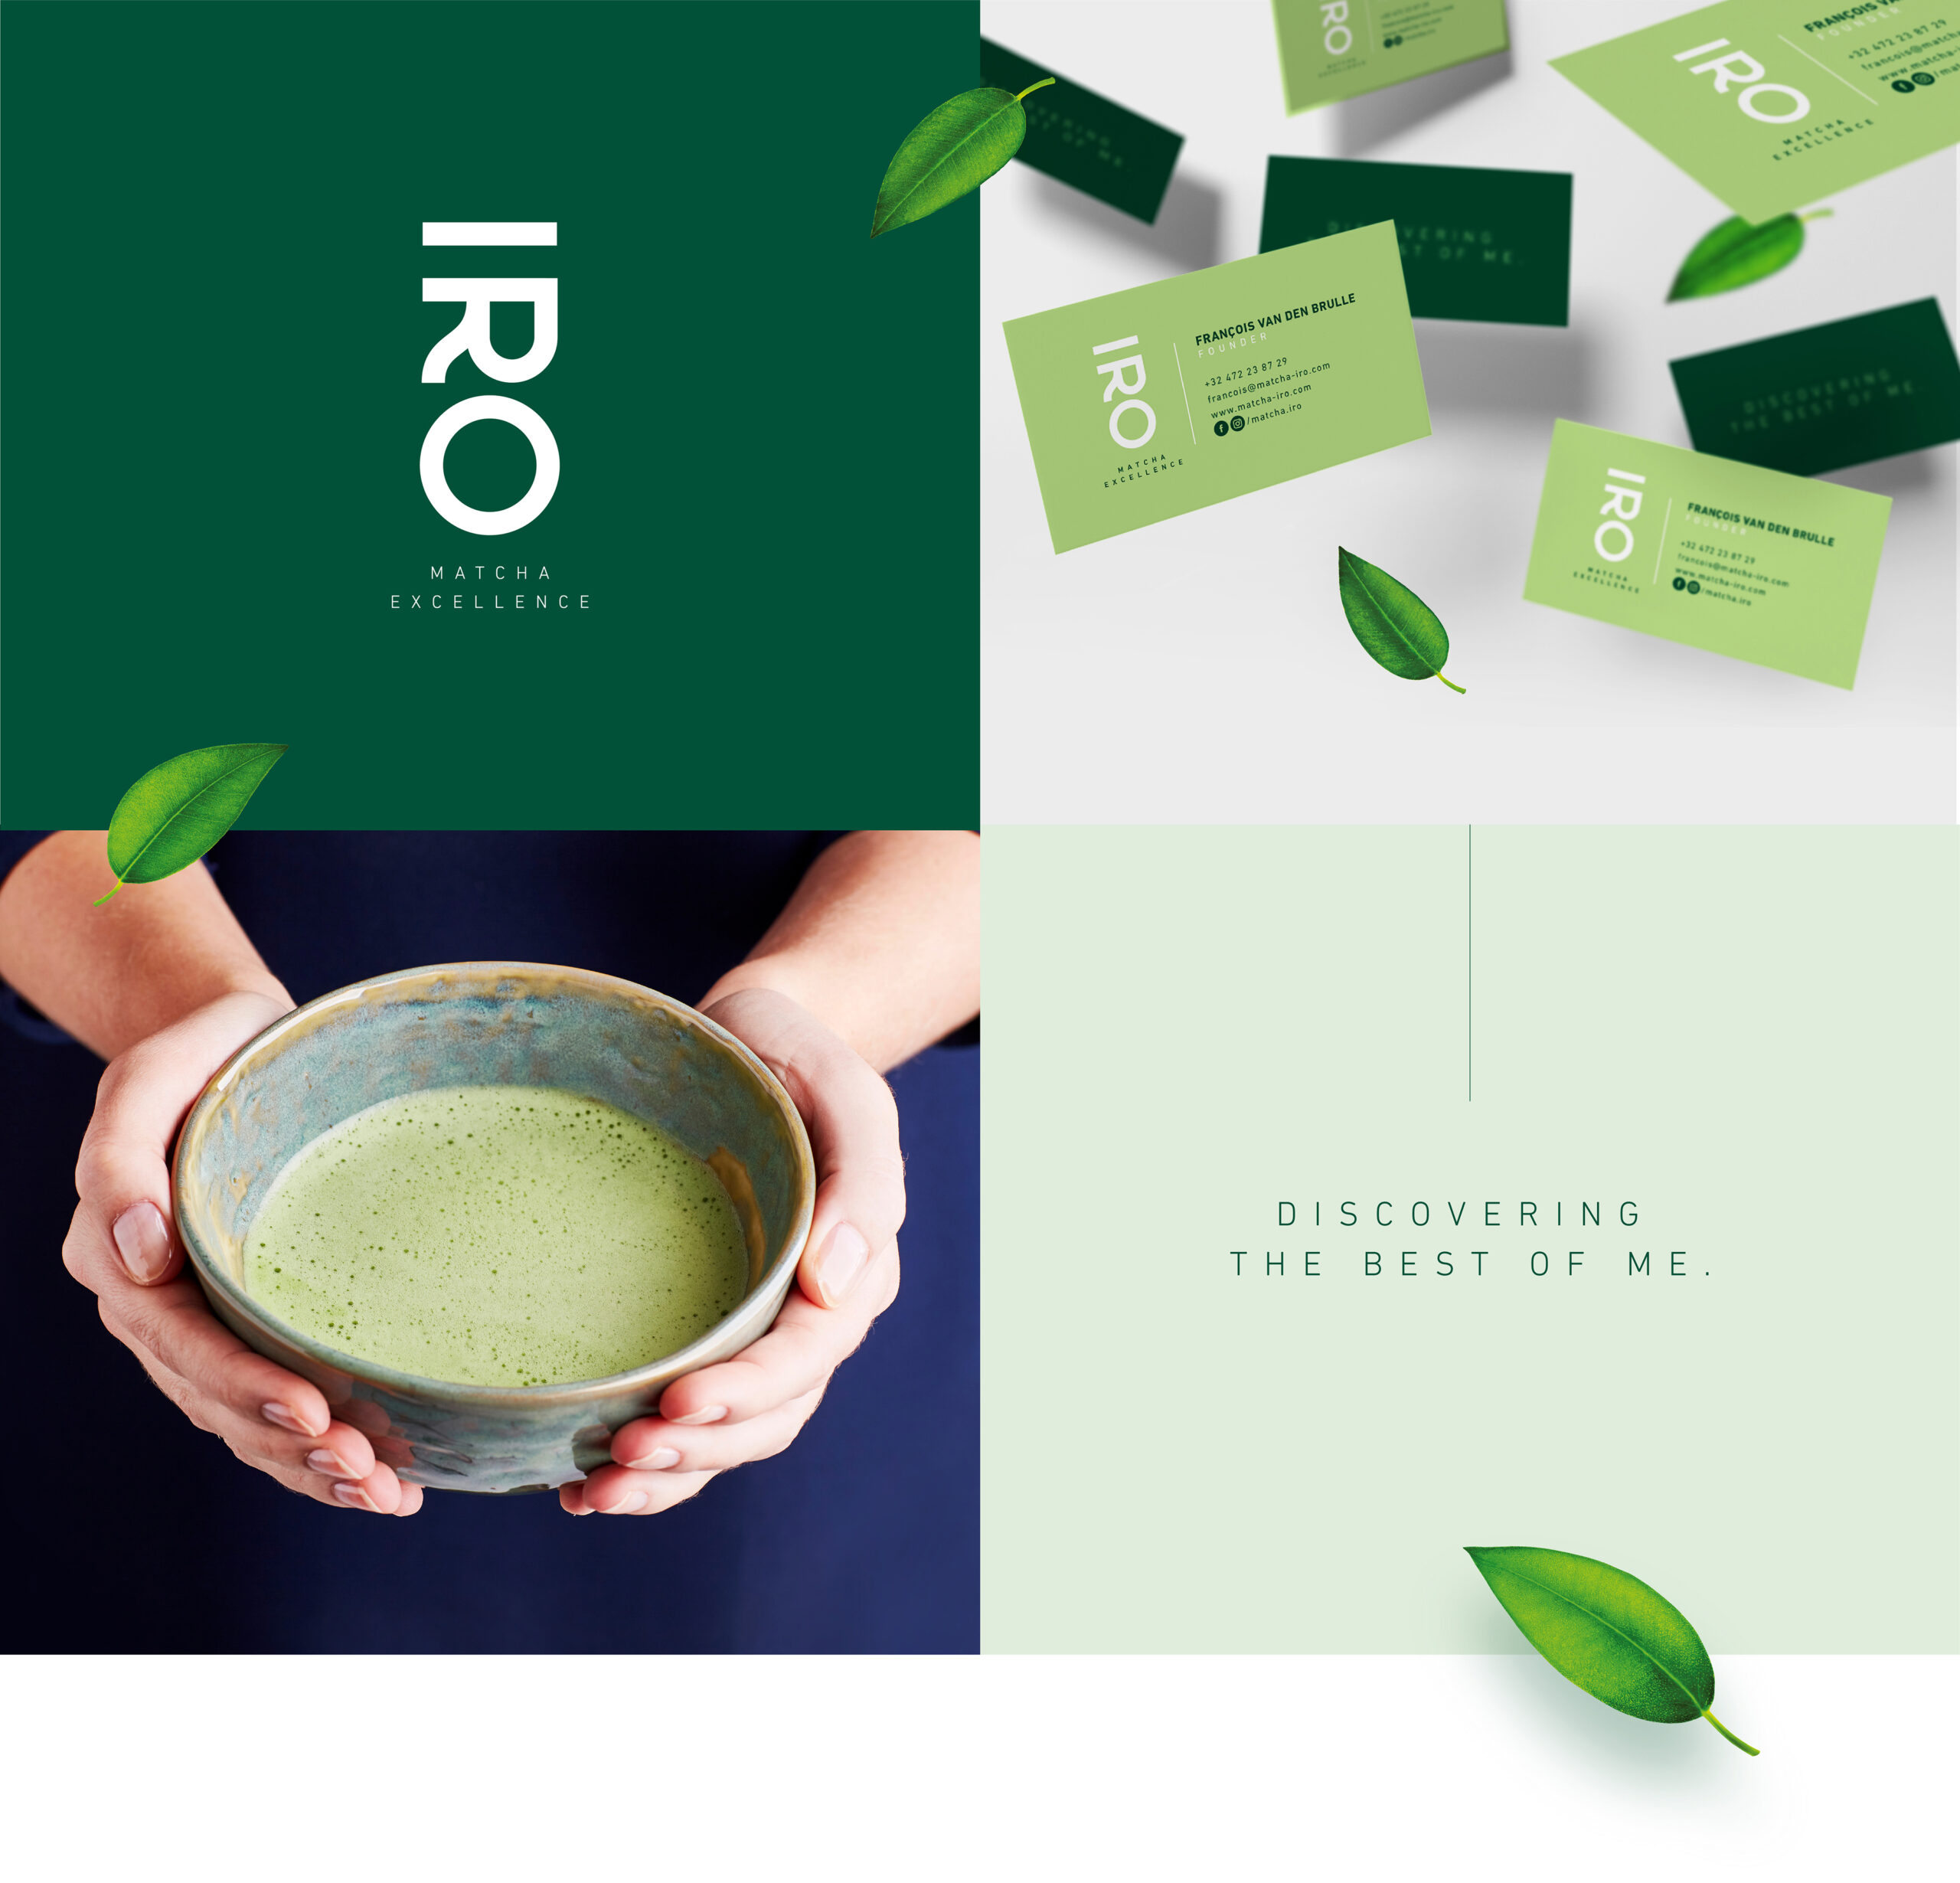 Creation of the visual universe for the IRO brand, by Atelier design